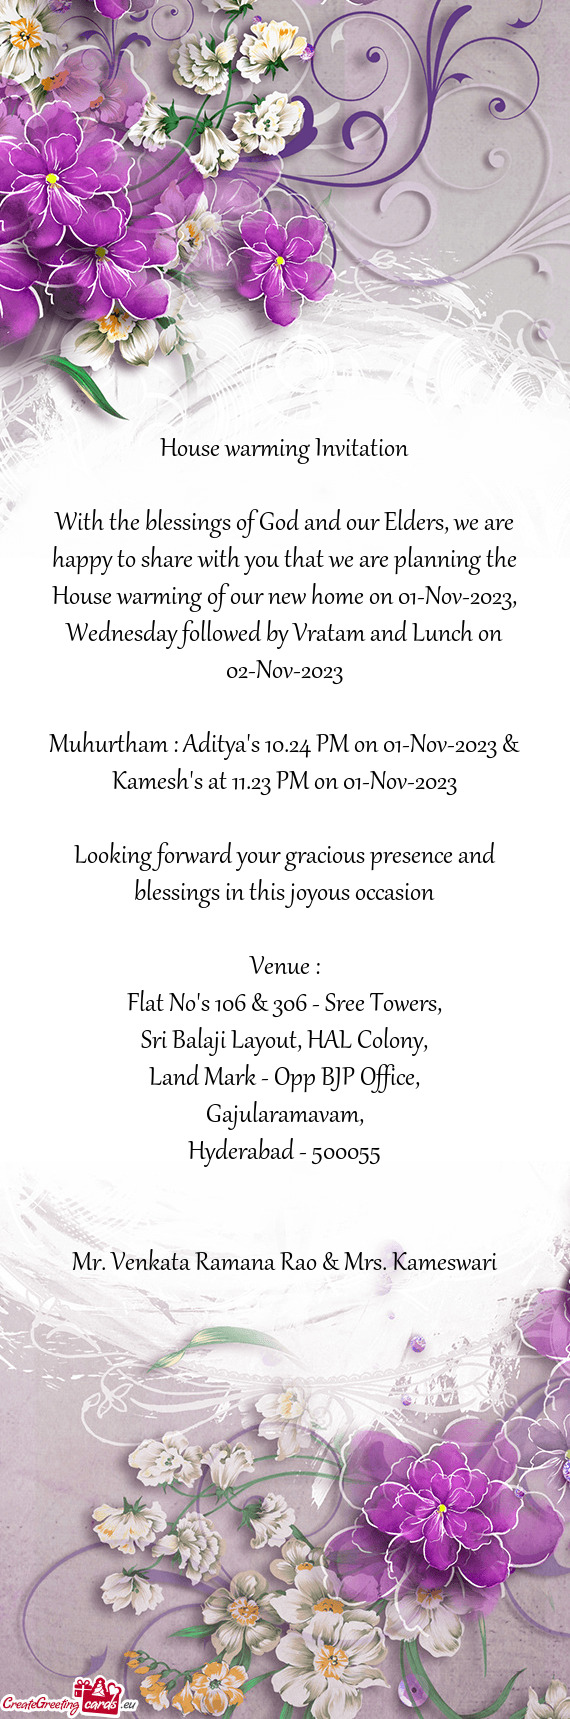 Use warming of our new home on 01-Nov-2023, Wednesday followed by Vratam and Lunch on 02-Nov-2023